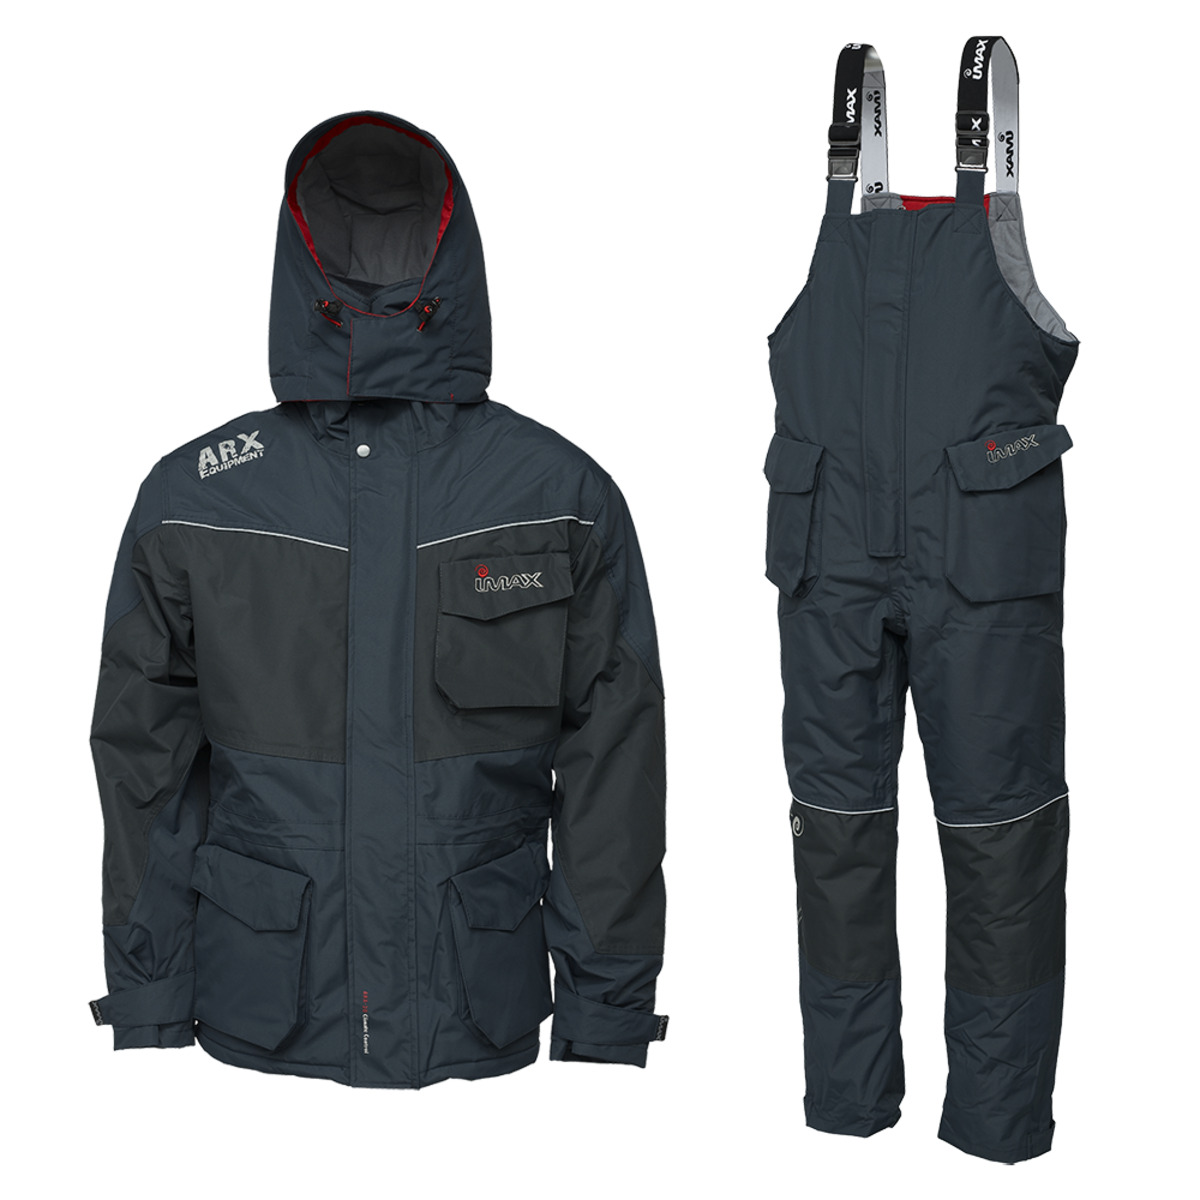 Imax Arx-20 Ice Thermo Suit - M BLUE